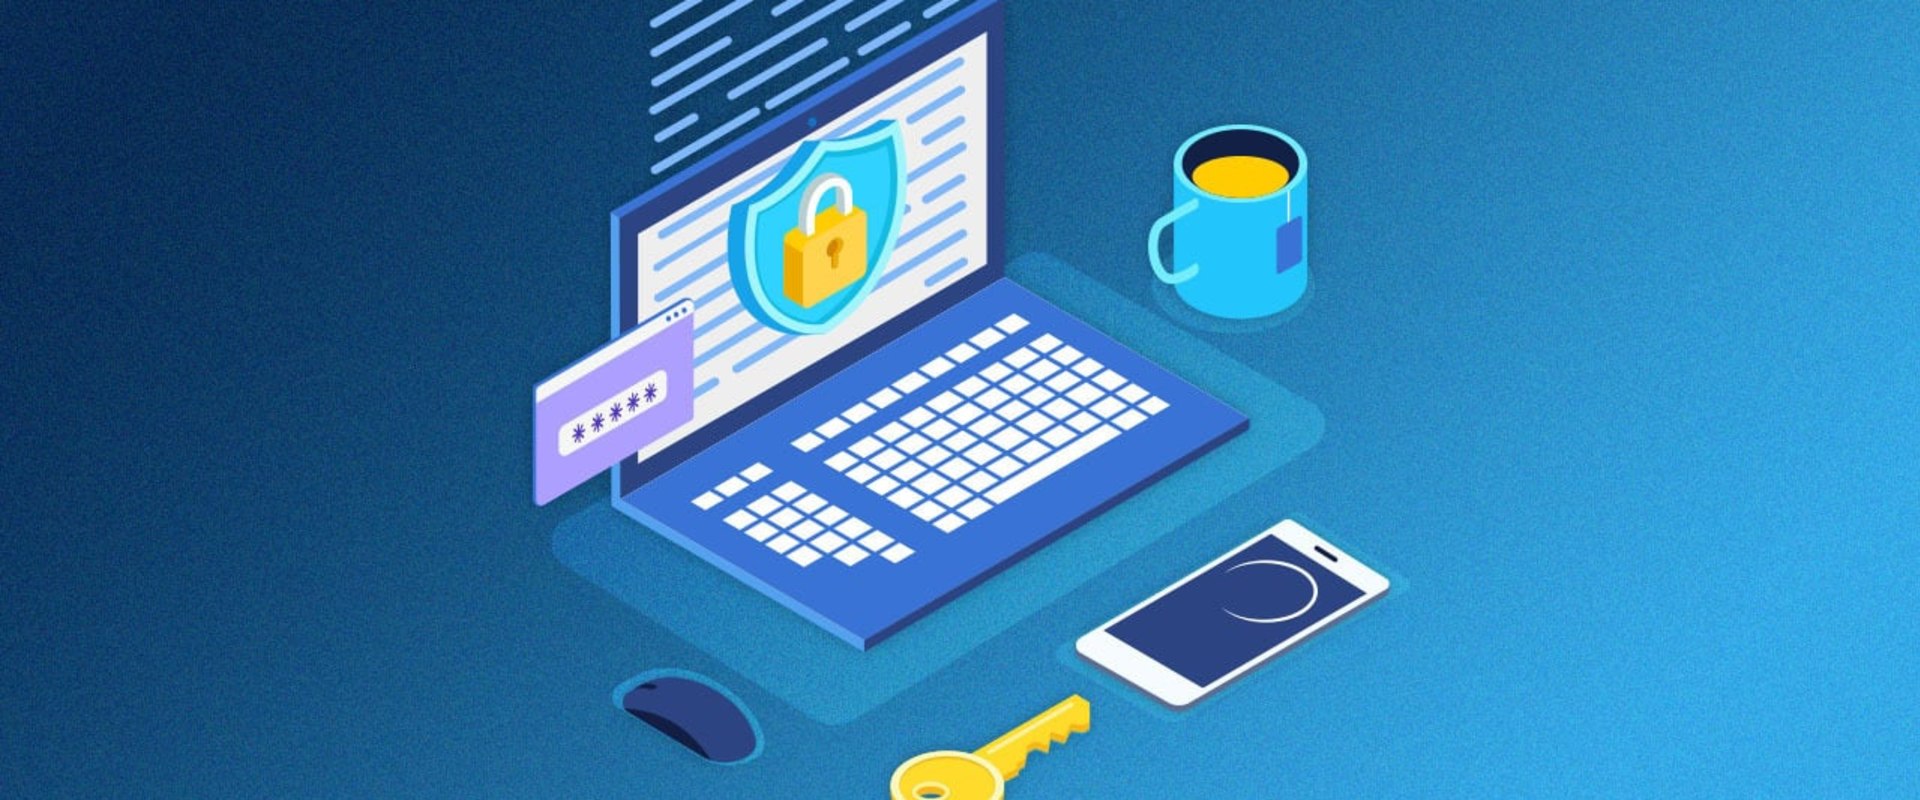 Securing Online Accounts and Payments: A Guide